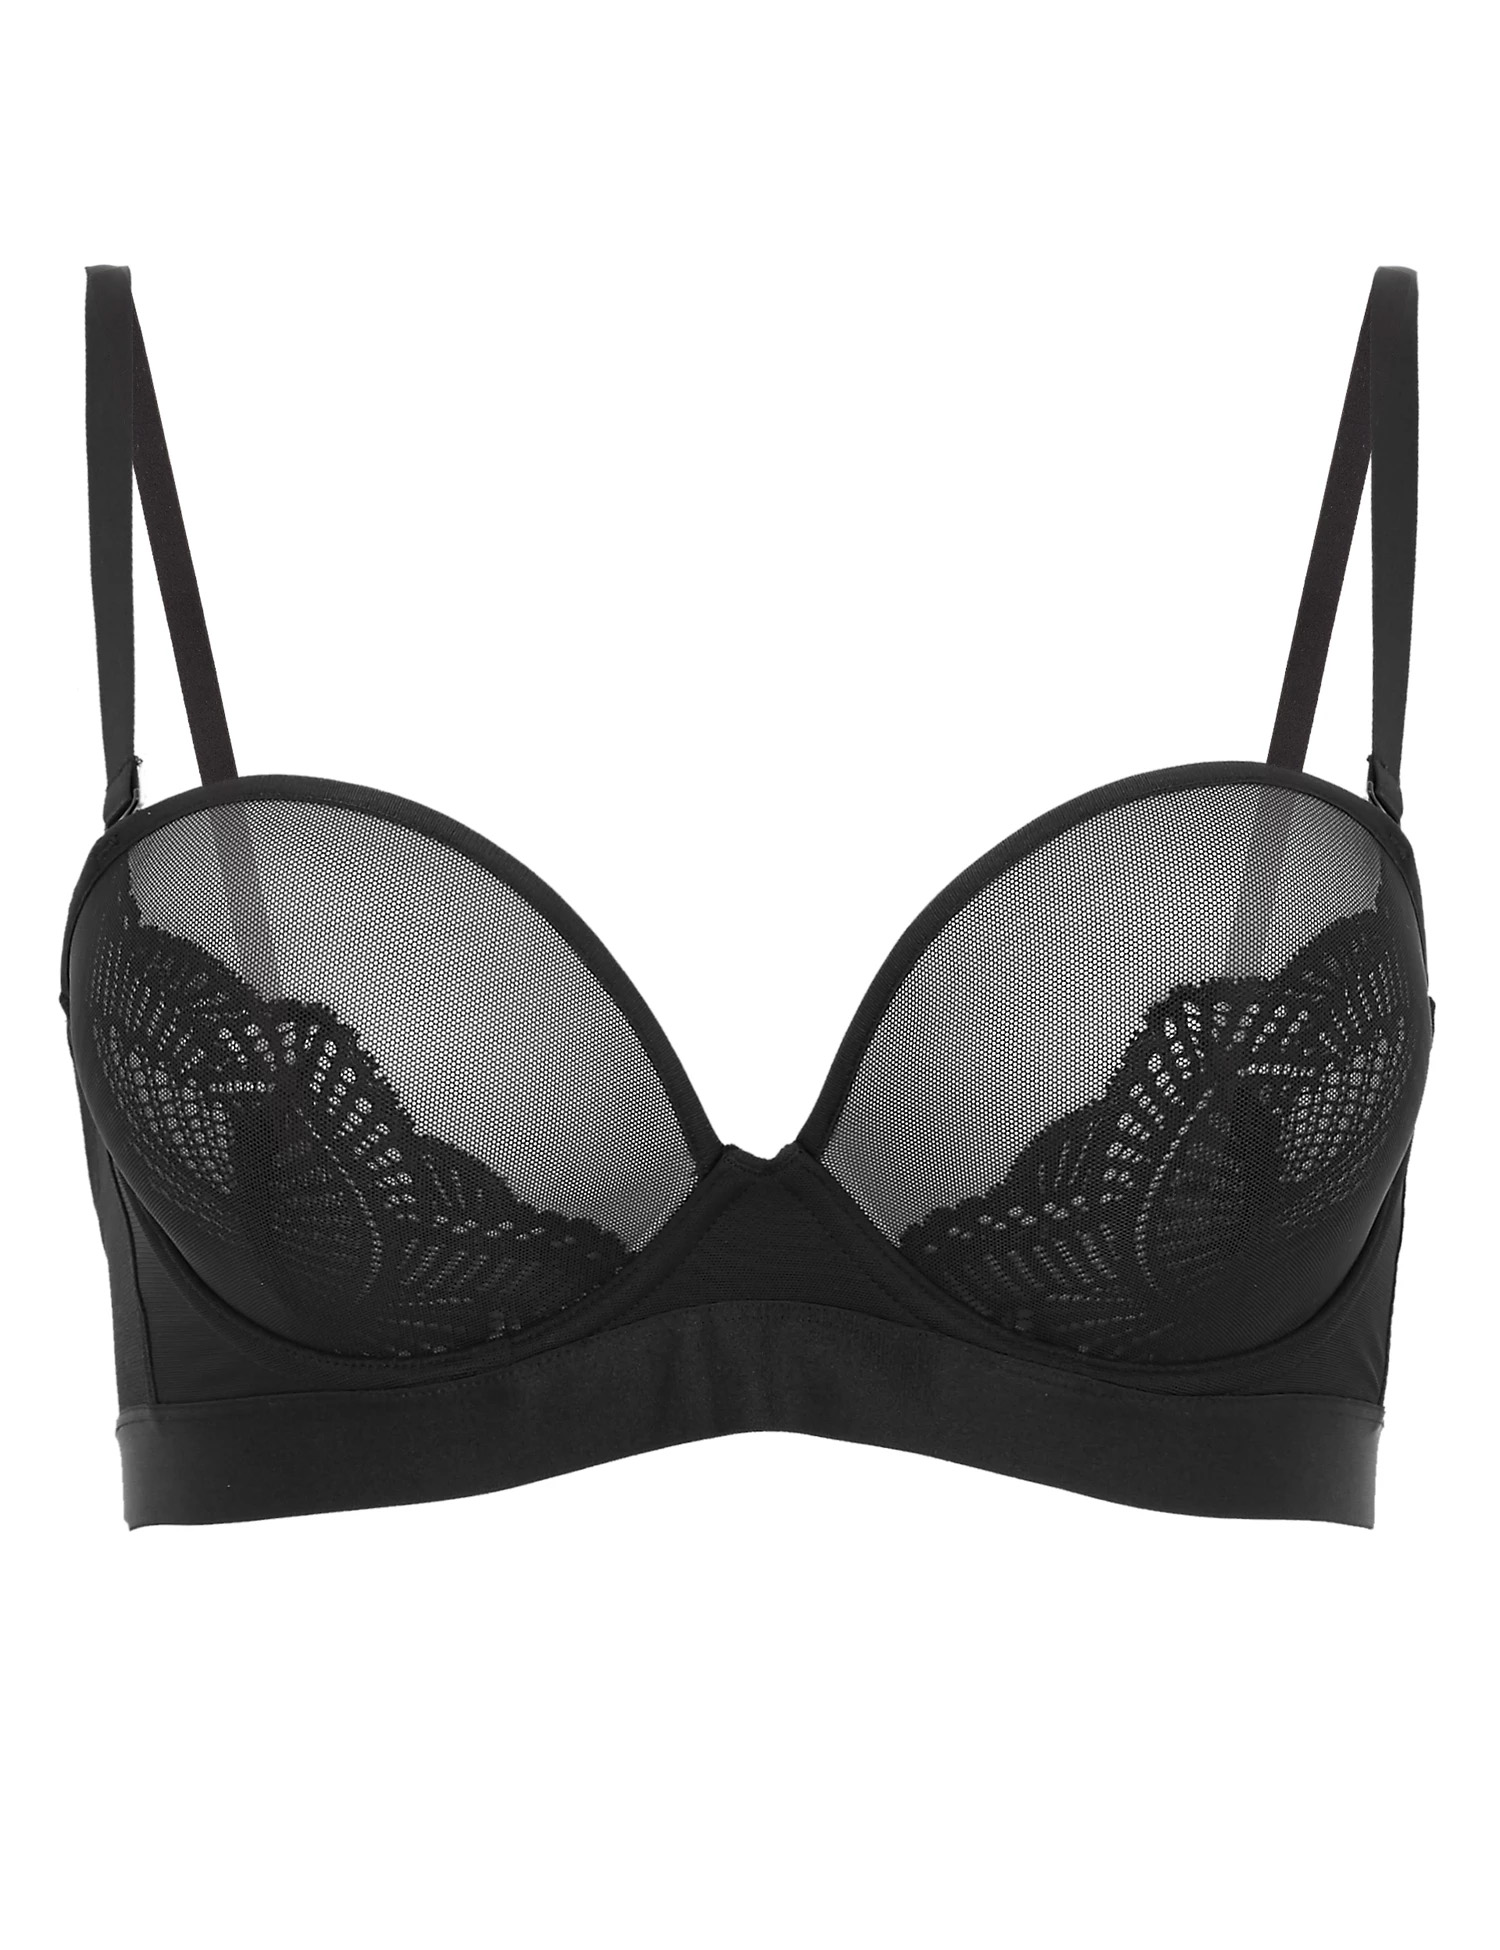 Marks and Spencer - - M&5 BLACK Lace Push Up Multiway Bra - Size 34 to ...